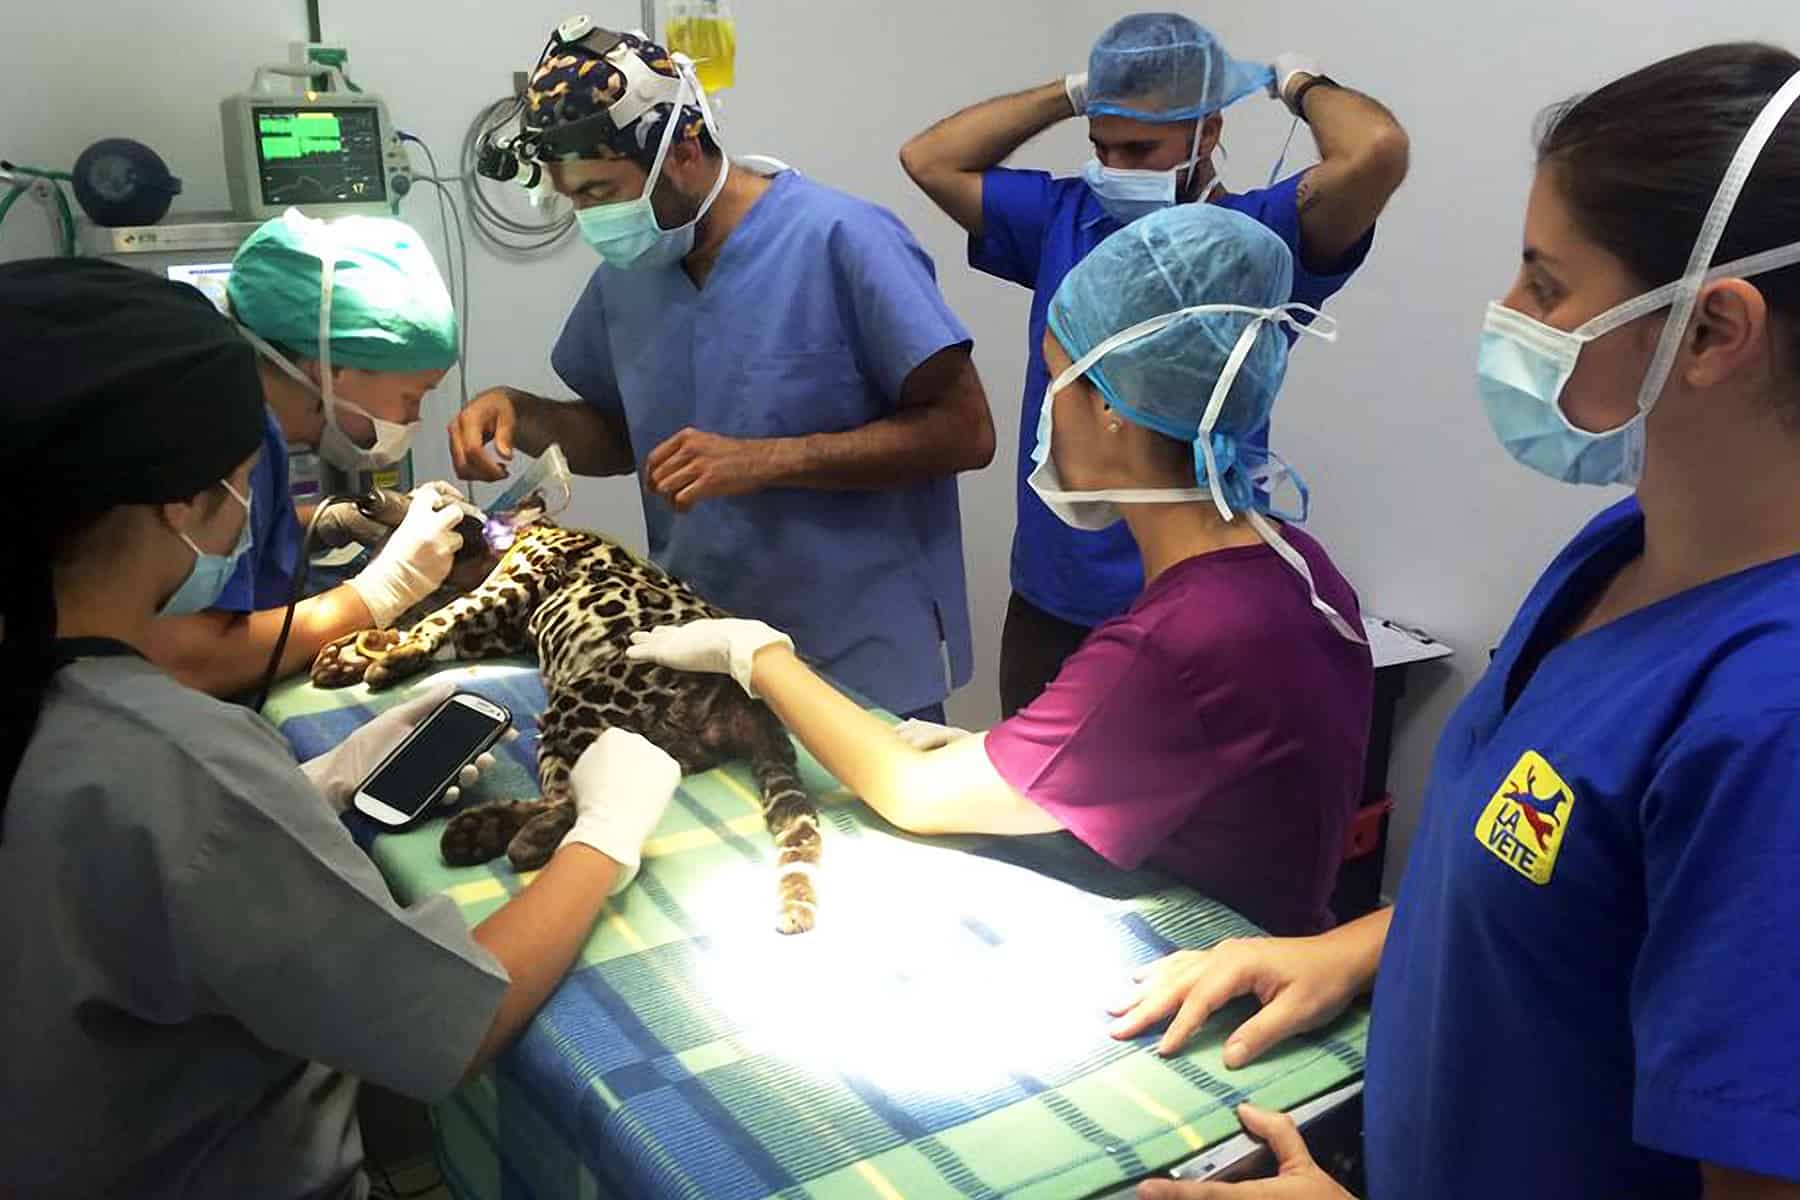 Surgery to repair the jaw of Alik the ocelot.